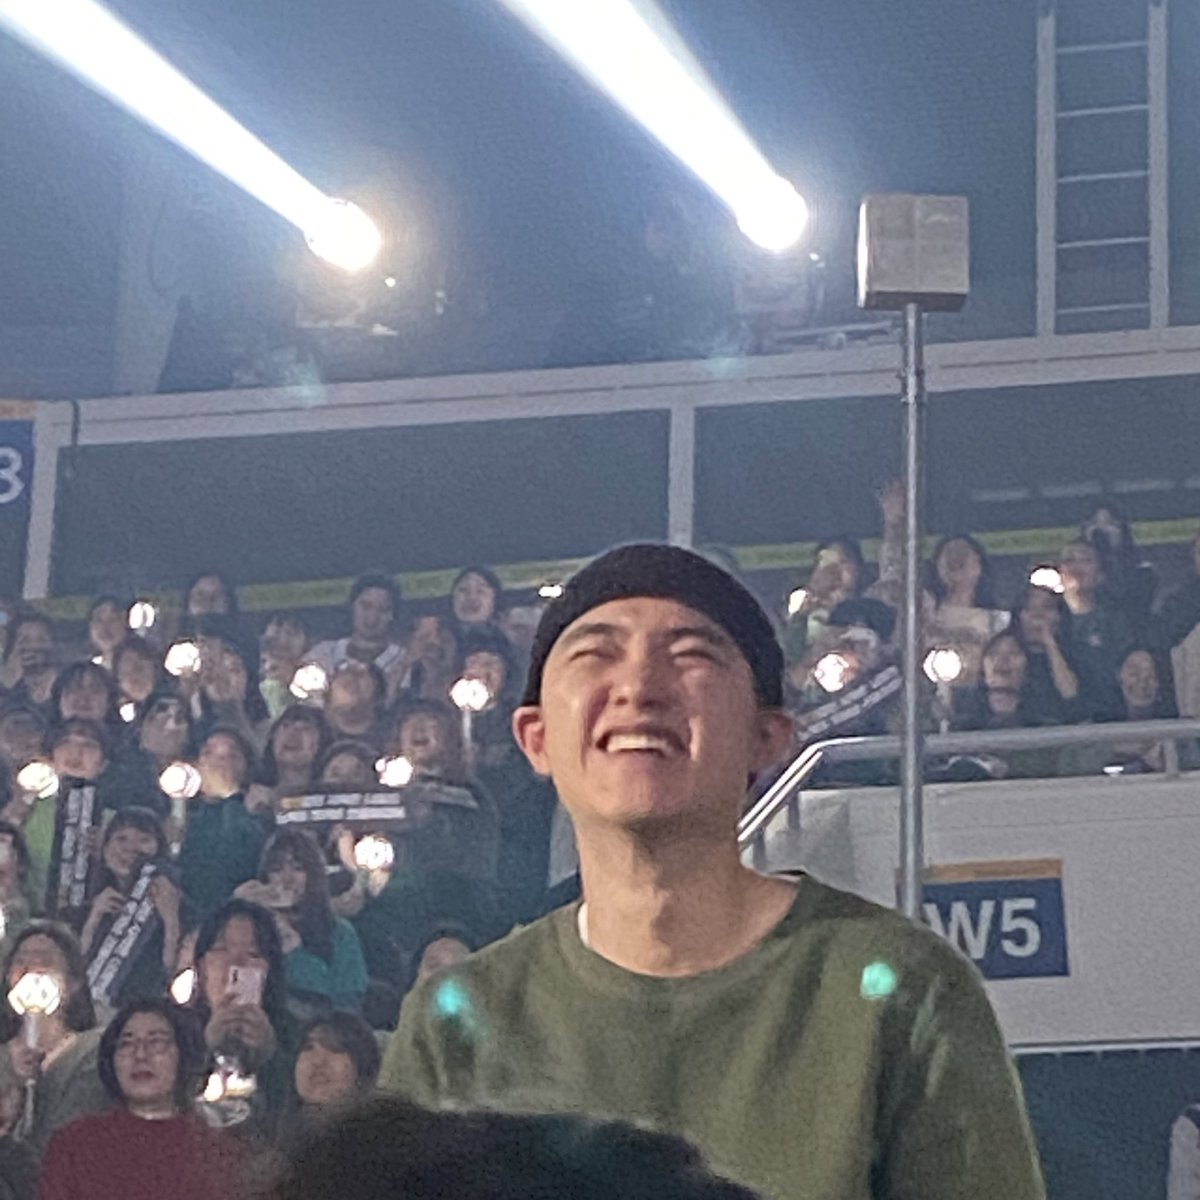 *•.¸♡ 𝐃-𝟑𝟗𝟑 ♡¸.•*I can’t believe this day. I cried my eyes out because you surprised us all  it’s so overwhelming that my heart is bursting from so much happiness, you and all of EXO will always be in my heart for life  #도경수  #디오  @weareoneEXO  #EXplOrationDot